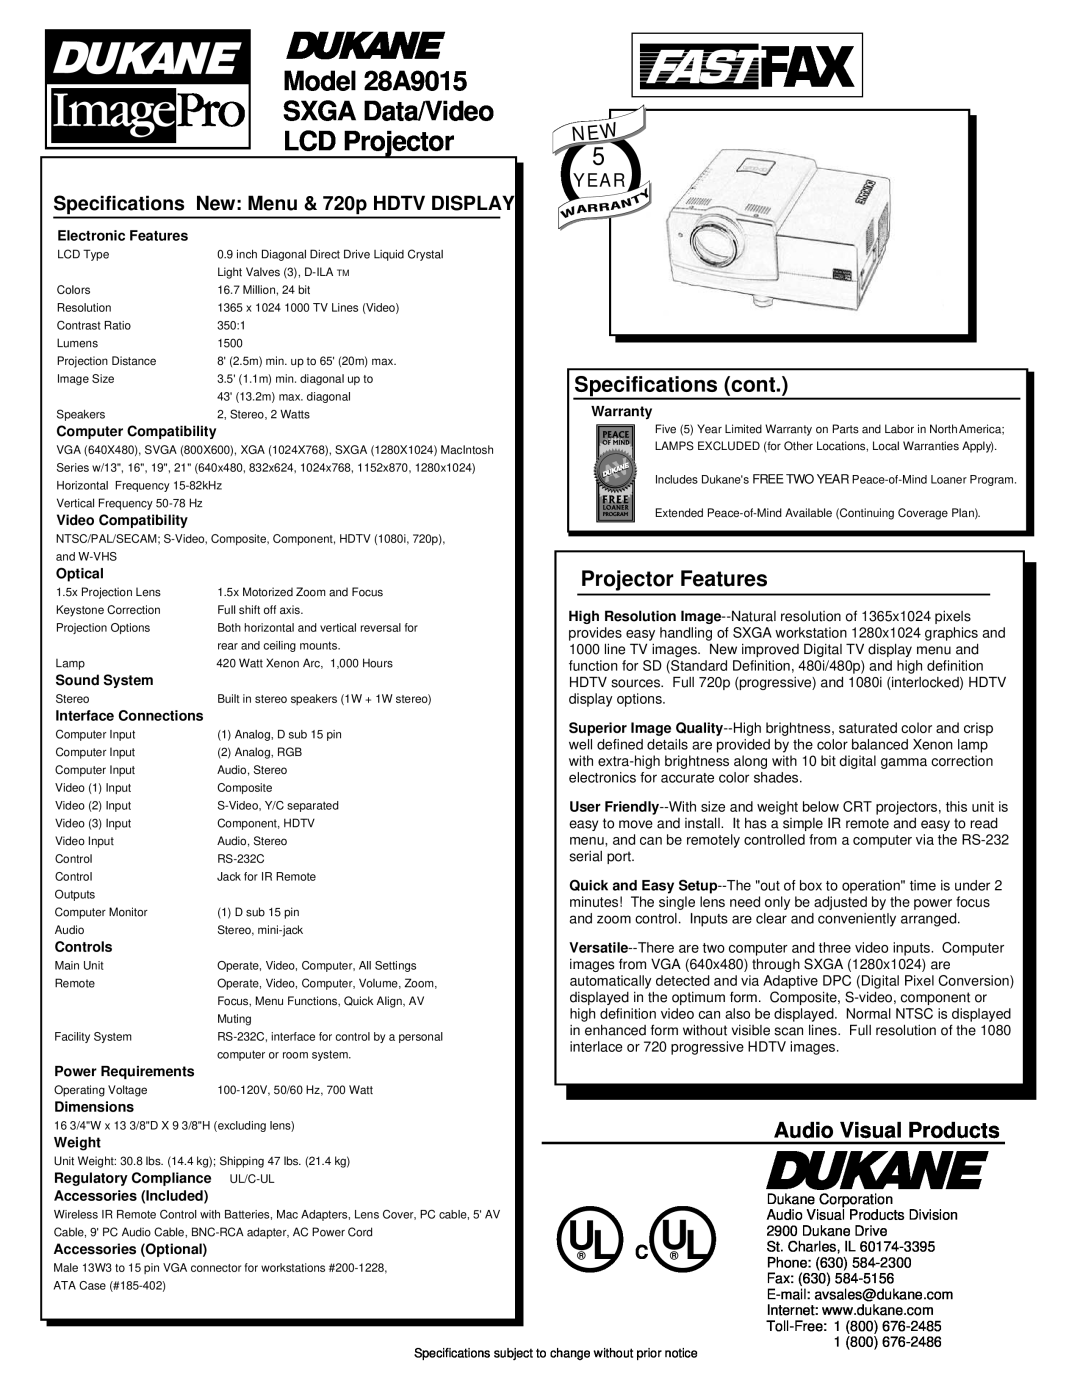 Dukane Model 28A9015, SXGA Data/Video, LCD Projector, Specifications cont, Projector Features, Audio Visual Products 